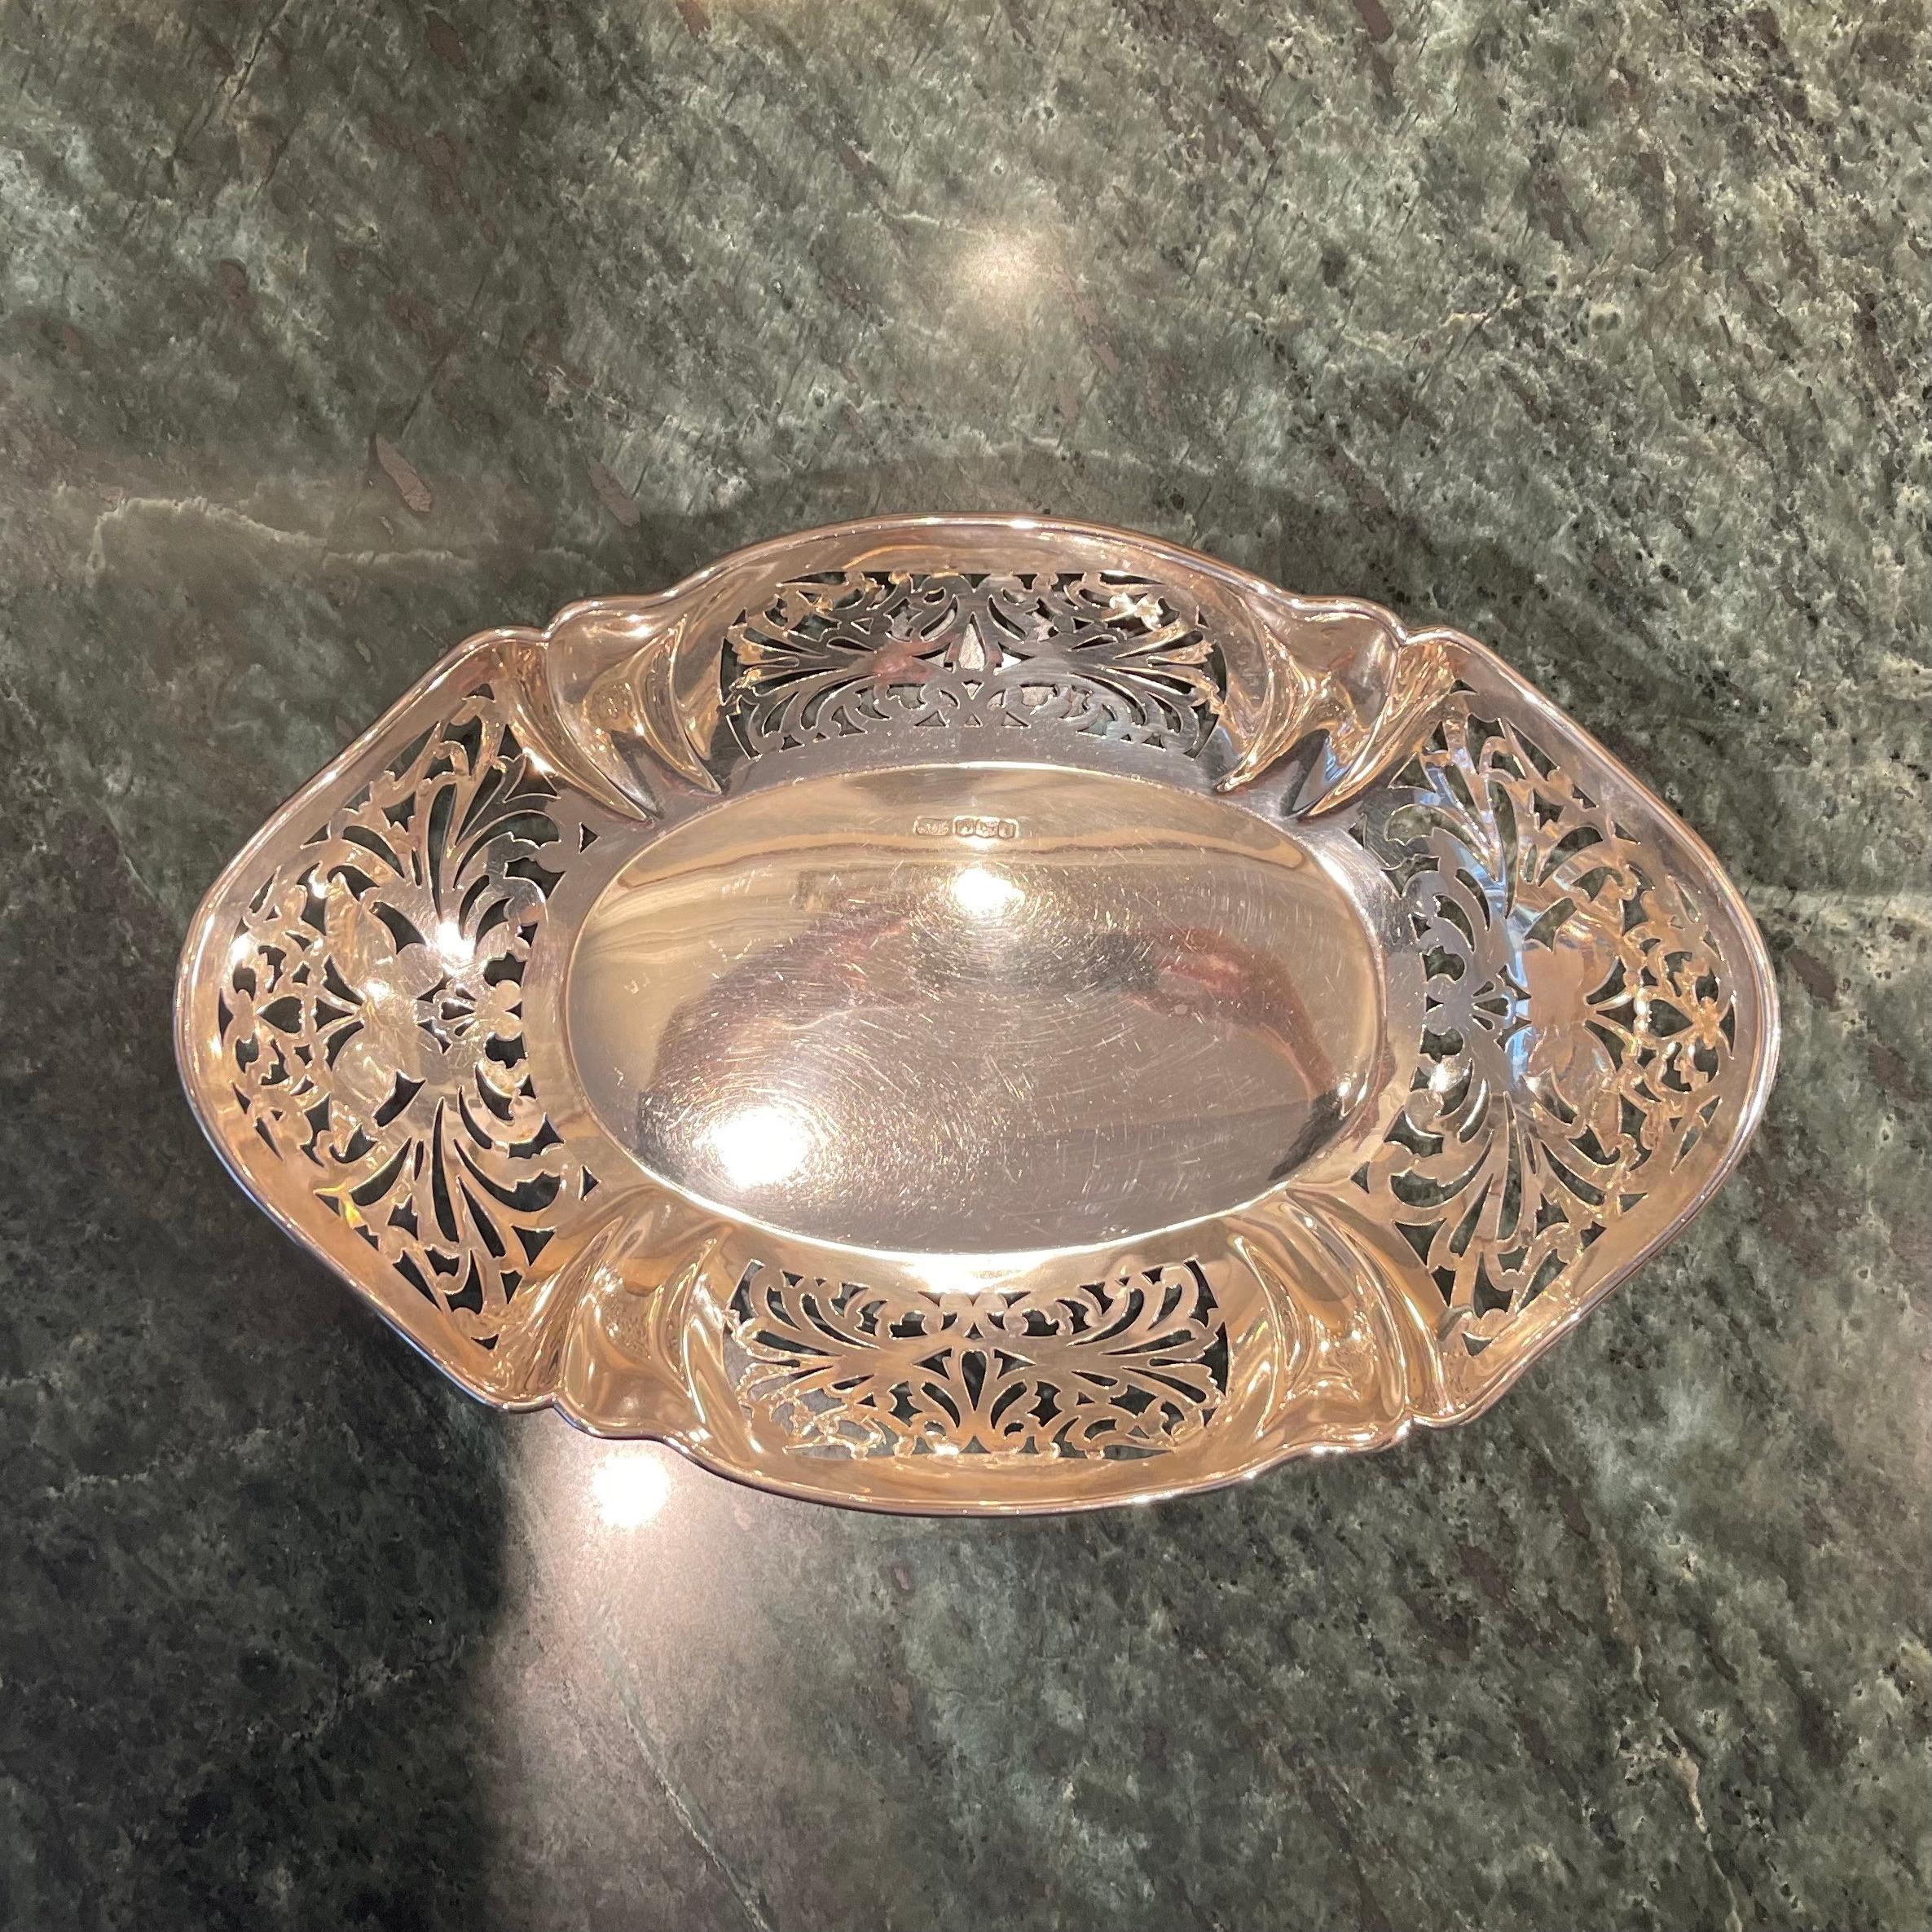 Art Deco Sterling Silver Breadbasket with Butterfly Motifs, R F Mosley, 1926 For Sale 3